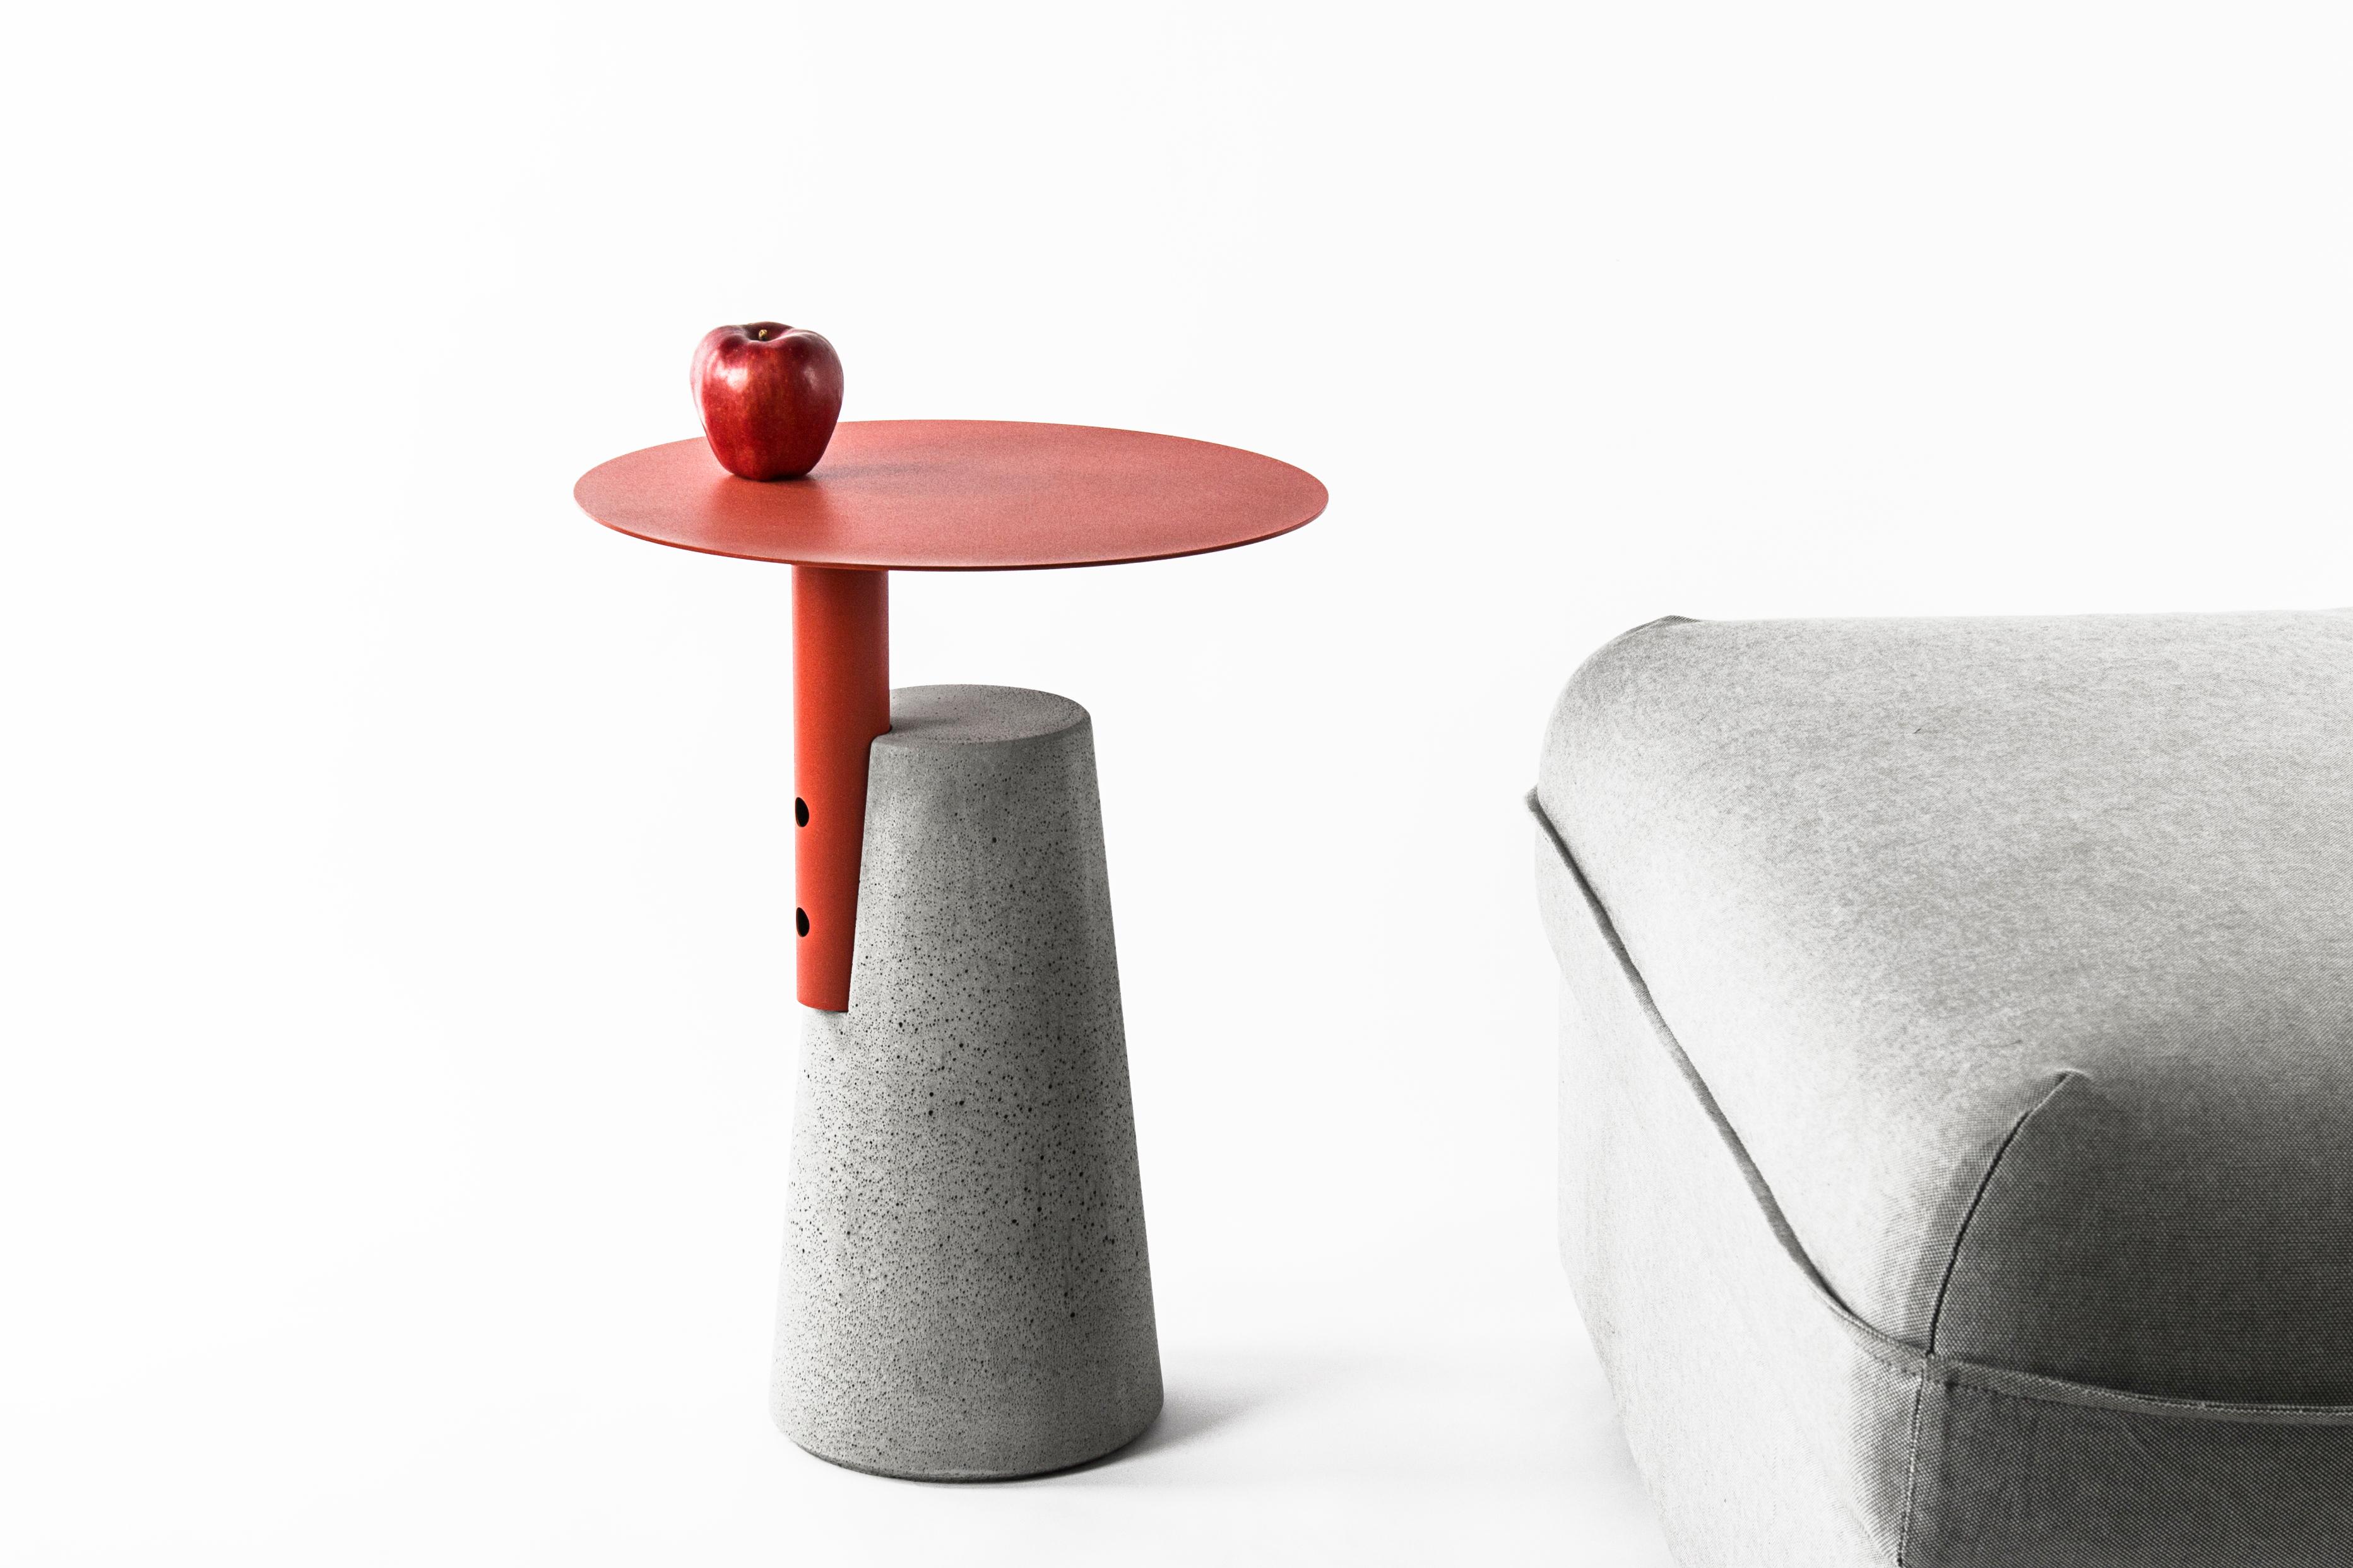 Material: Concrete, demolition leftover concrete, powder coated steel
Size: 400 x 400 x H 520 mm
Color: Cement Grey
Tabletop Color: Red

About the artist/ designer:
Bentu's furniture derives its uniqueness from the simplicity of its forms and